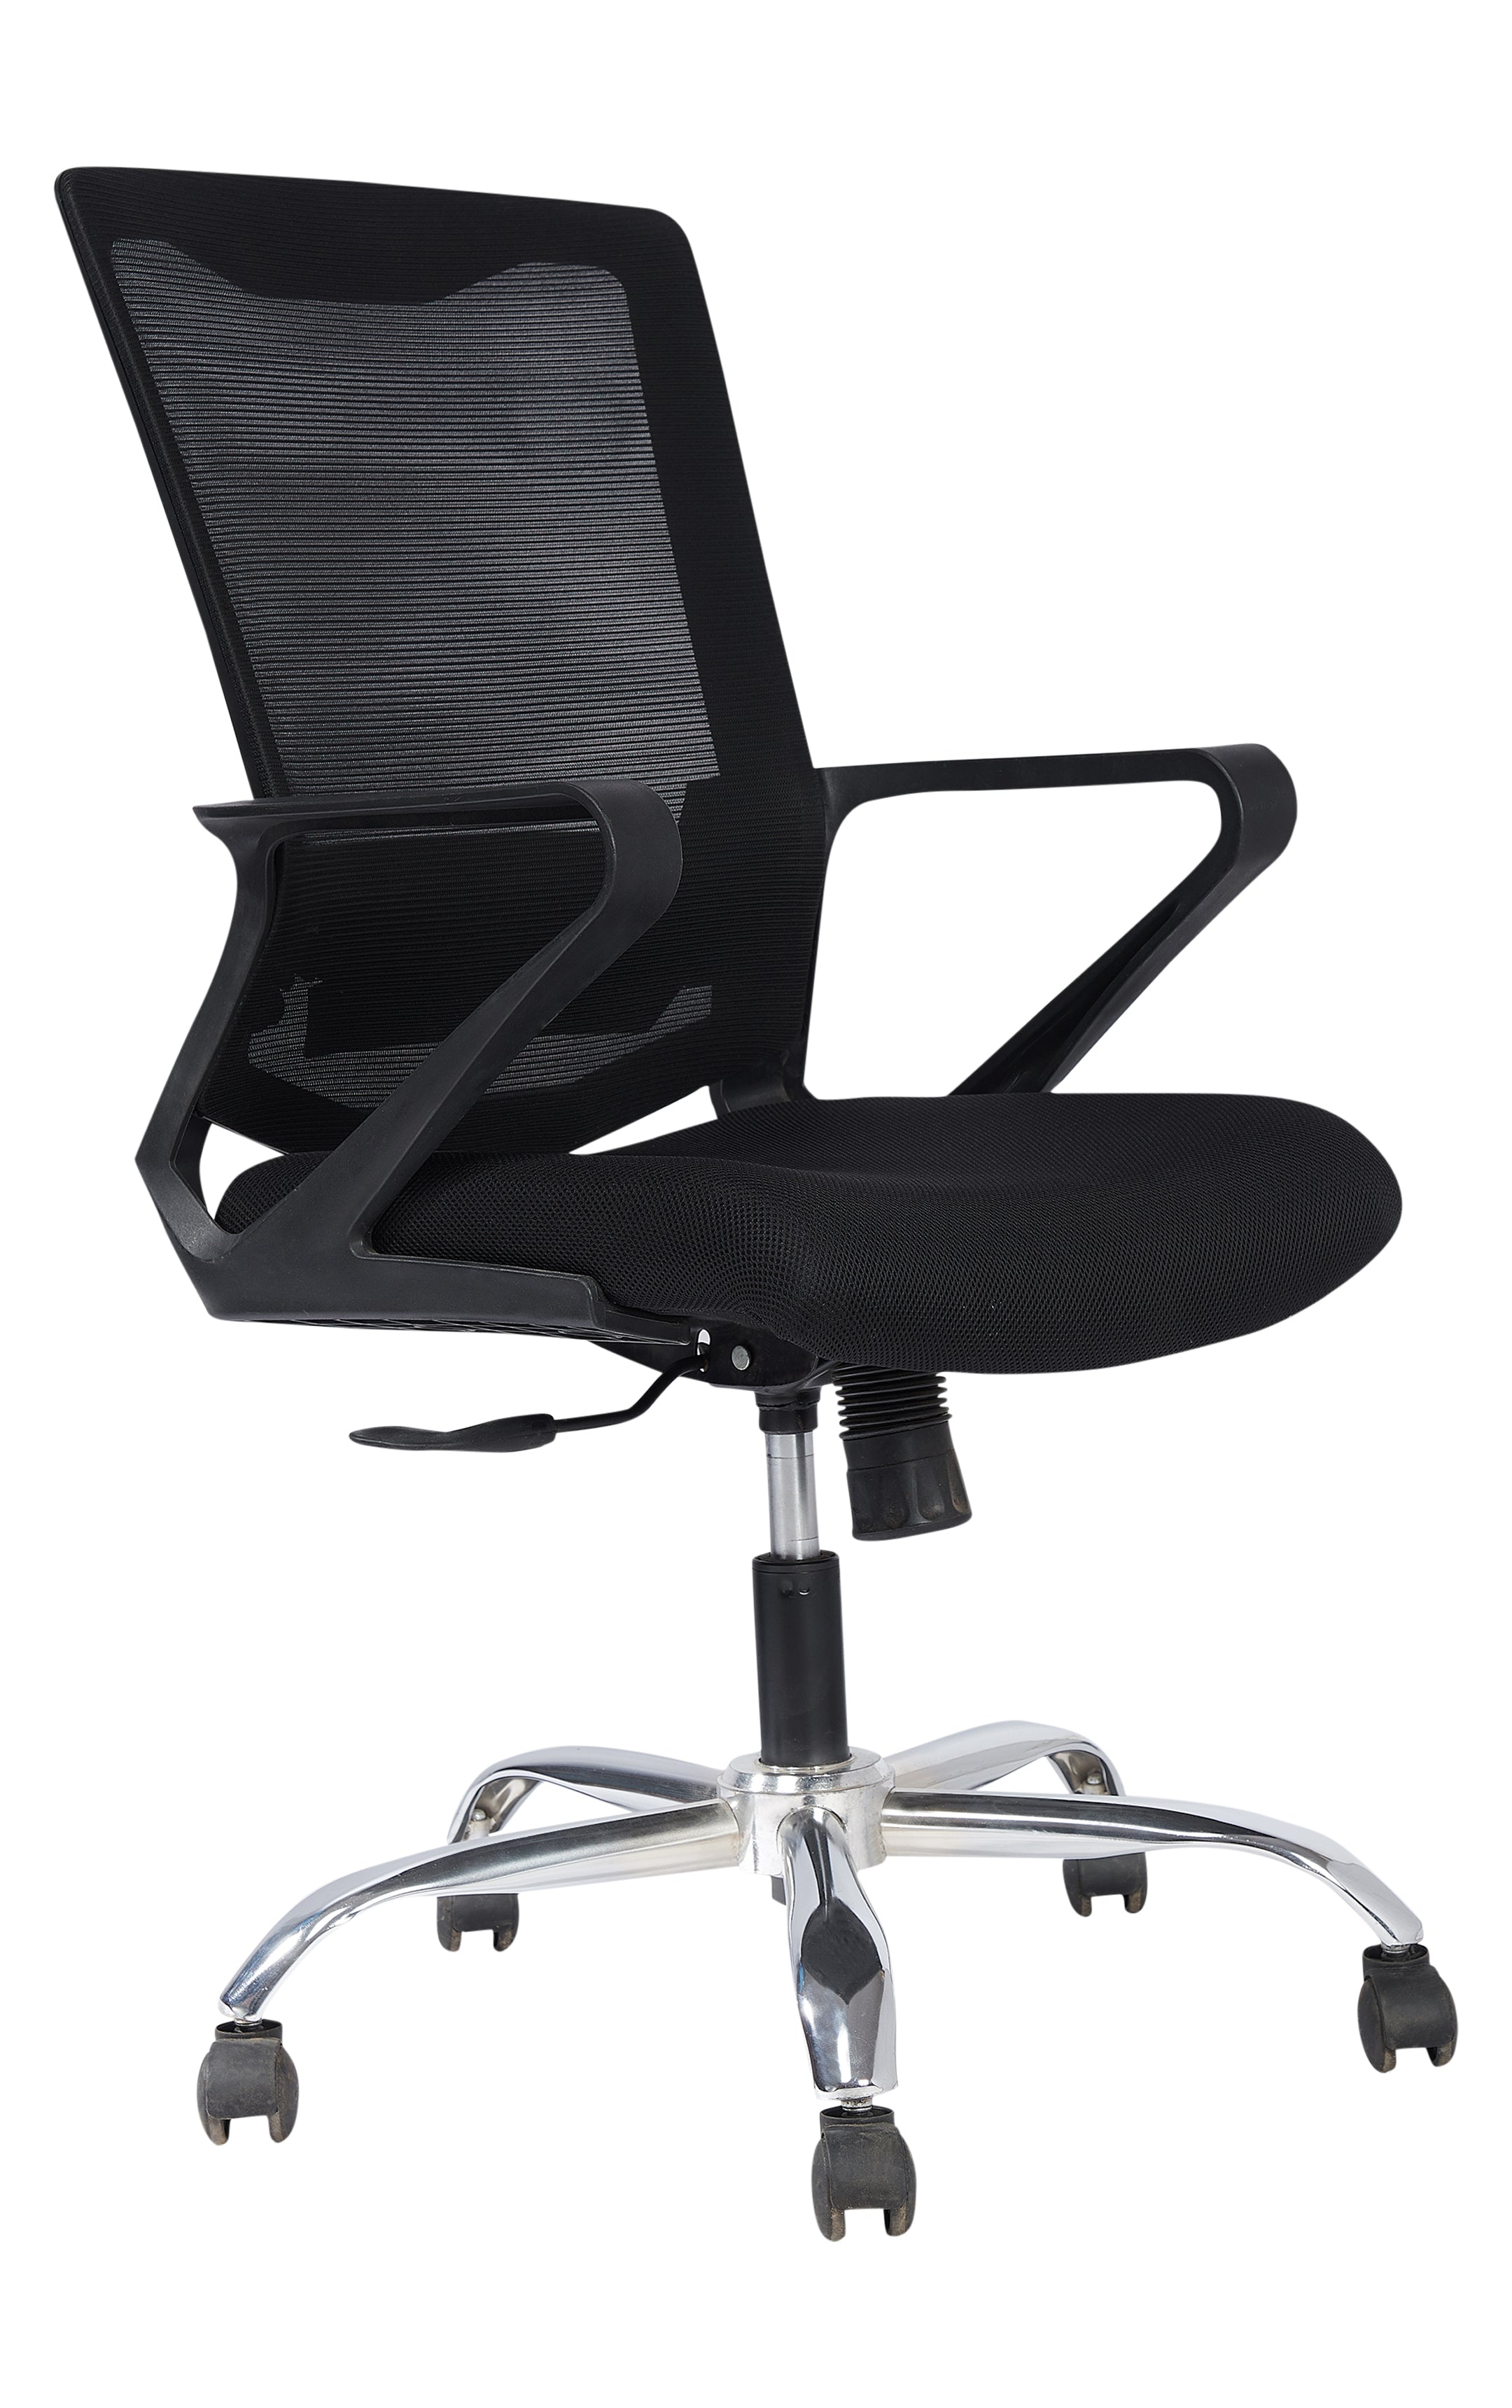 Rico Mid Back Ergonomic Office Chair With Cushion Seat And Chrome Base - Black